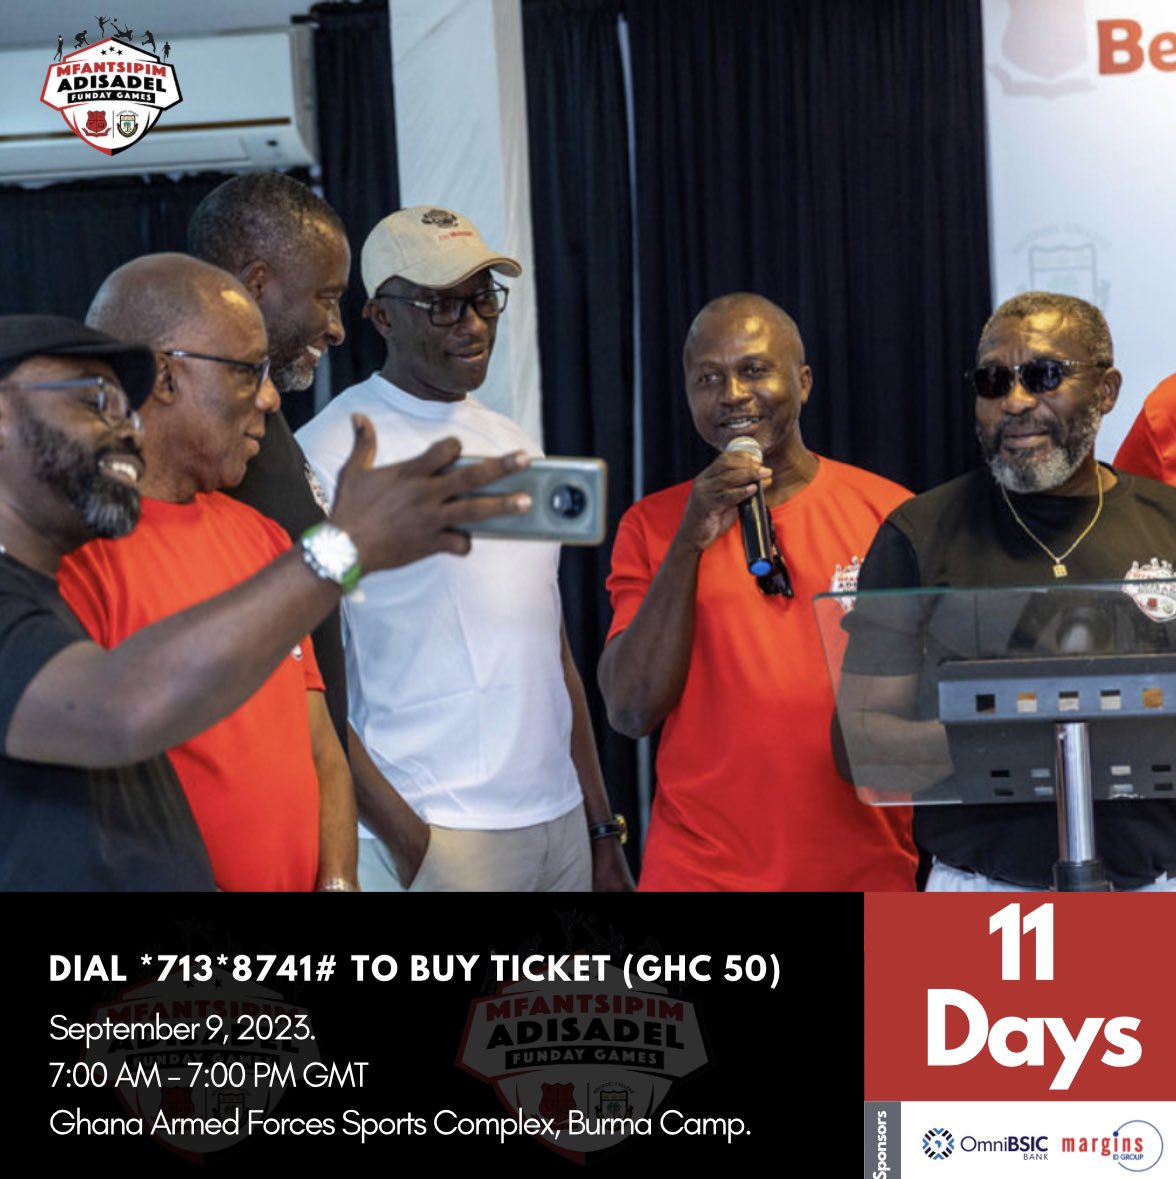 MAFDG 2023🔴⚪️⚫️

*GRAB YOUR TICKETS NOW!!!*

Join us at the Mfantsipim-Adisadel Fun Day Games, where camaraderie and sportsmanship took center stage. Grab your tickets at a cool GHc 50.00 

*DIAL *713*8741# to buy your tickets!!!*

#MAFDG2023
#MfantsipimSchool 
#AdisadelCollege